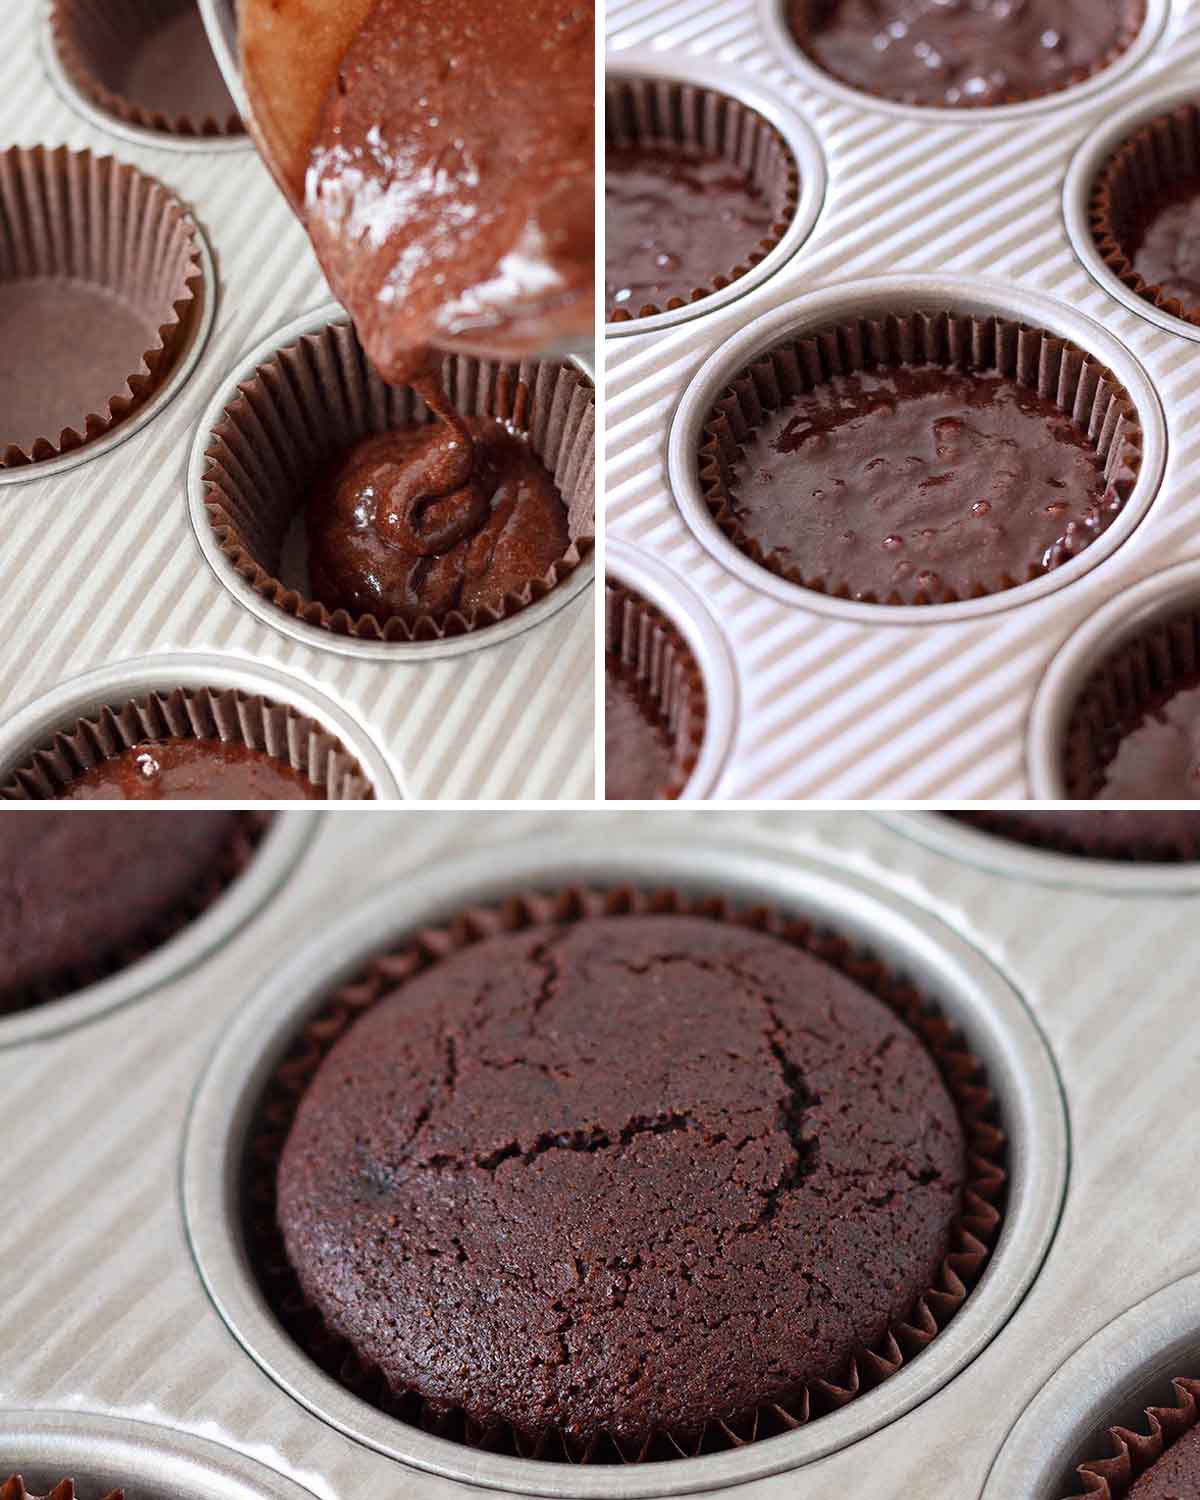 A collage of three images showing the second sequence of steps needed to make vegan gf chocolate cupcakes.